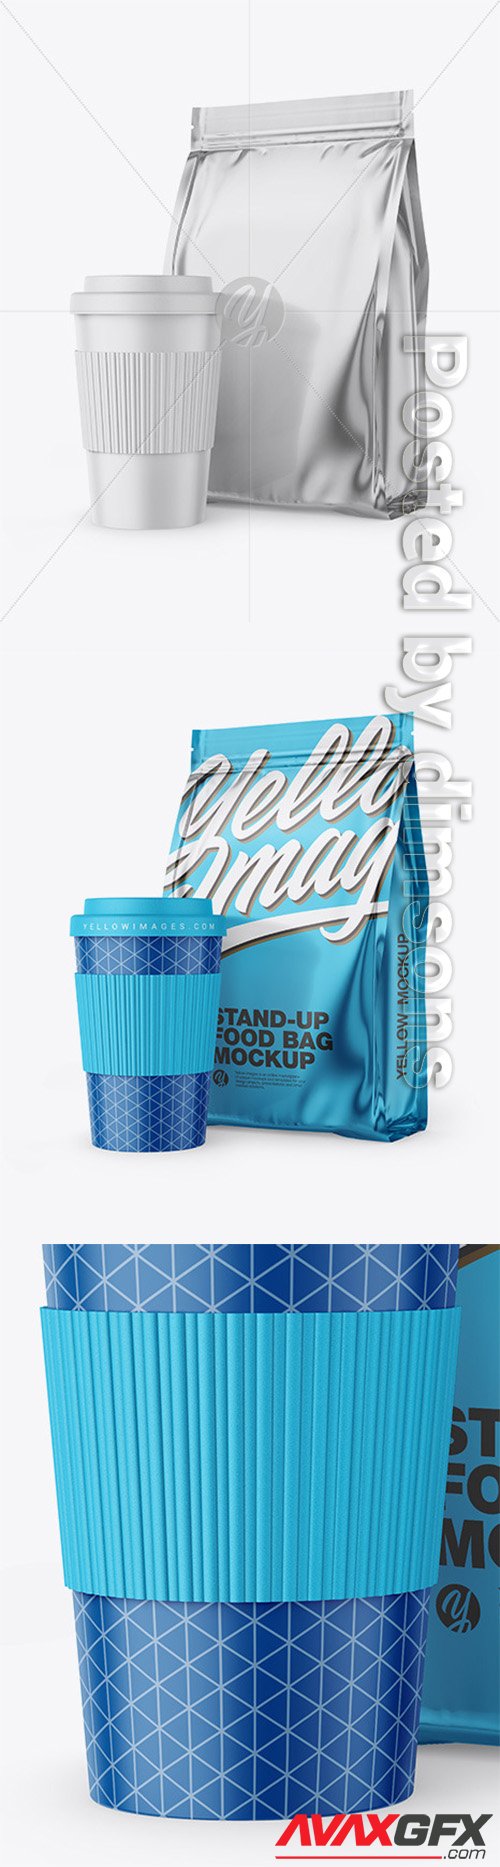 Download Metallic Stand Up Bag Mockup 328596704 Avaxgfx All Downloads That You Need In One Place Graphic From Nitroflare Rapidgator PSD Mockup Templates